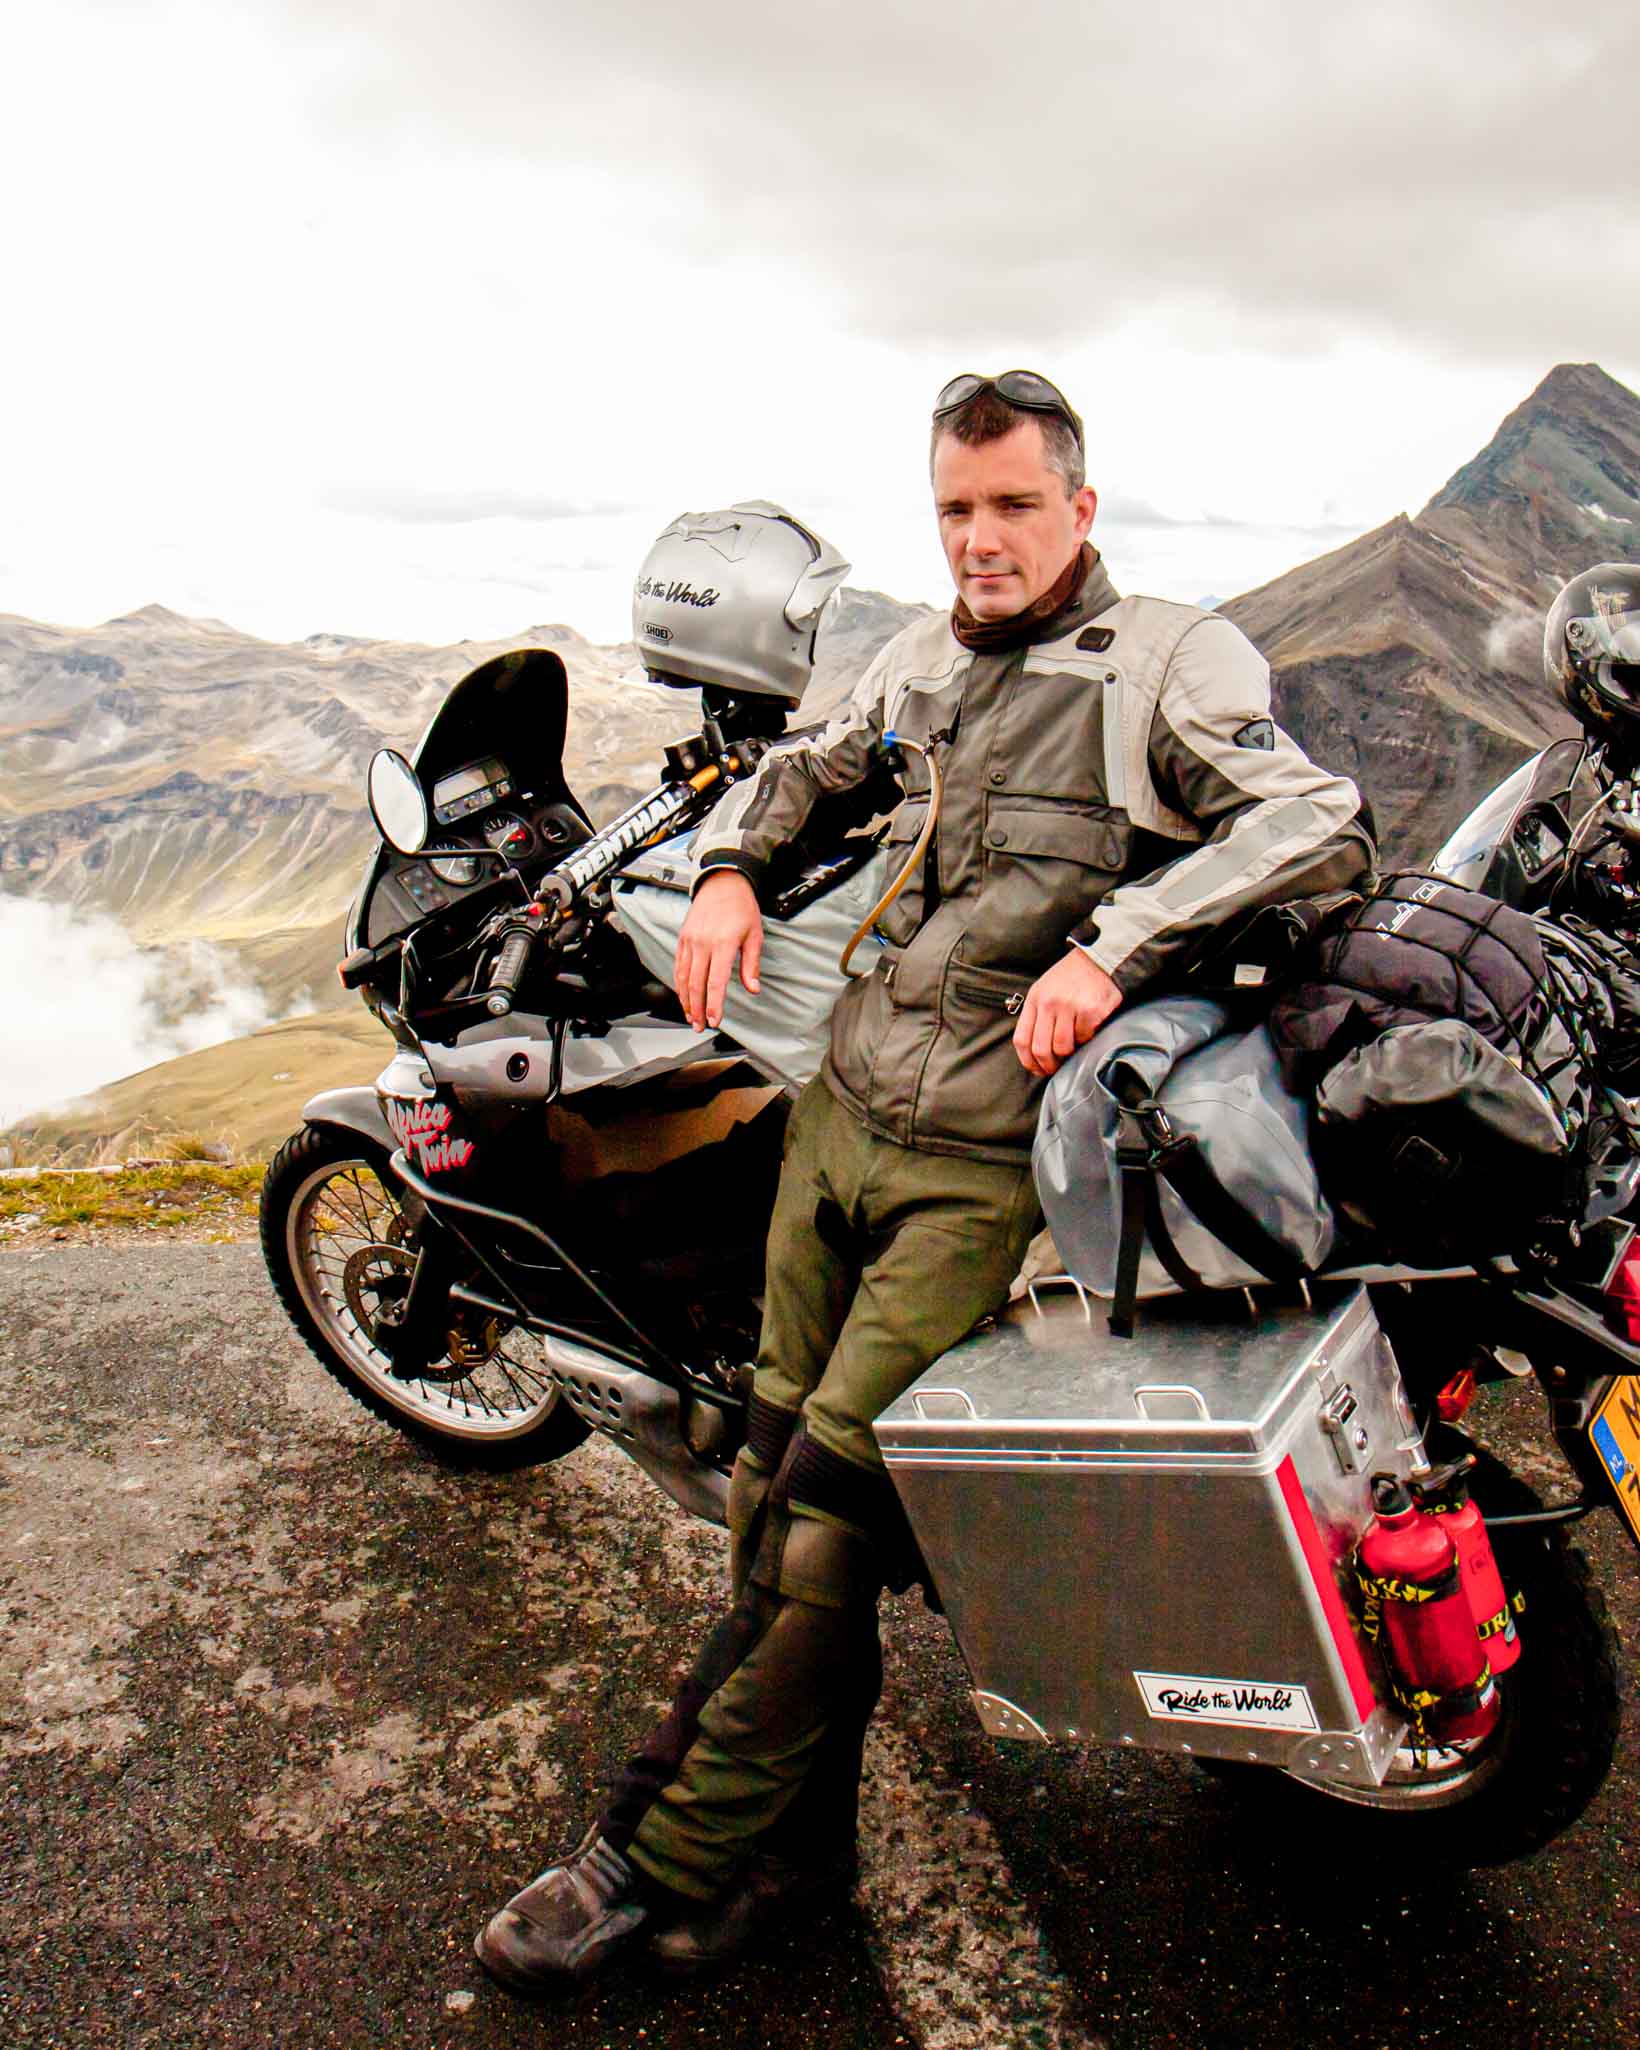 Peter Schelten Turkana gear founder long time passion for adventure motorcycle travel